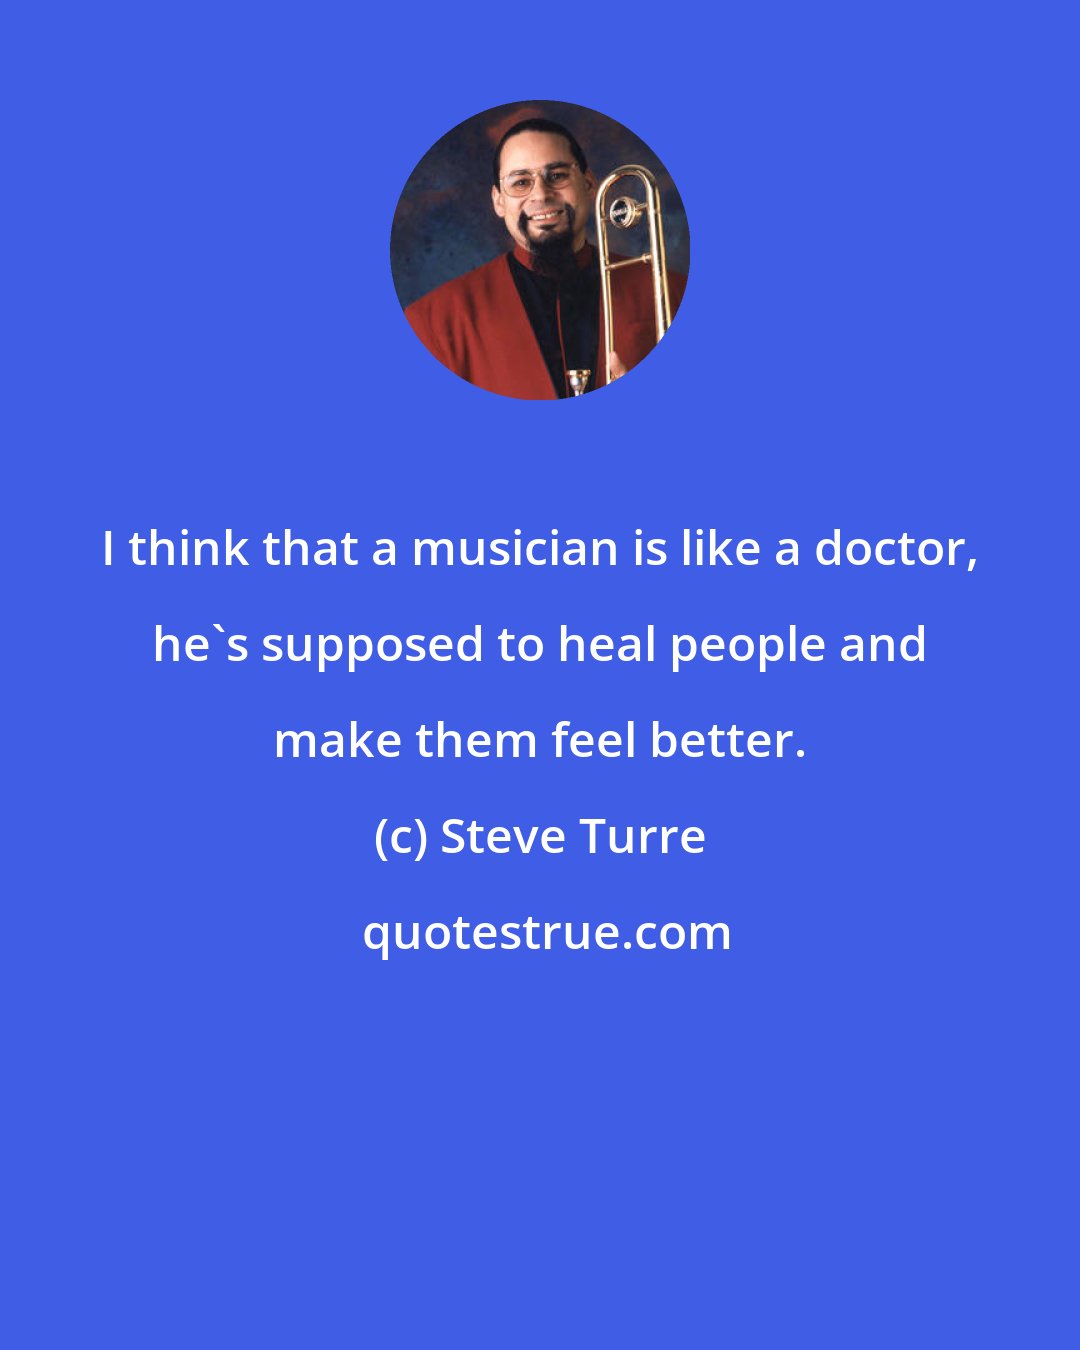 Steve Turre: I think that a musician is like a doctor, he's supposed to heal people and make them feel better.